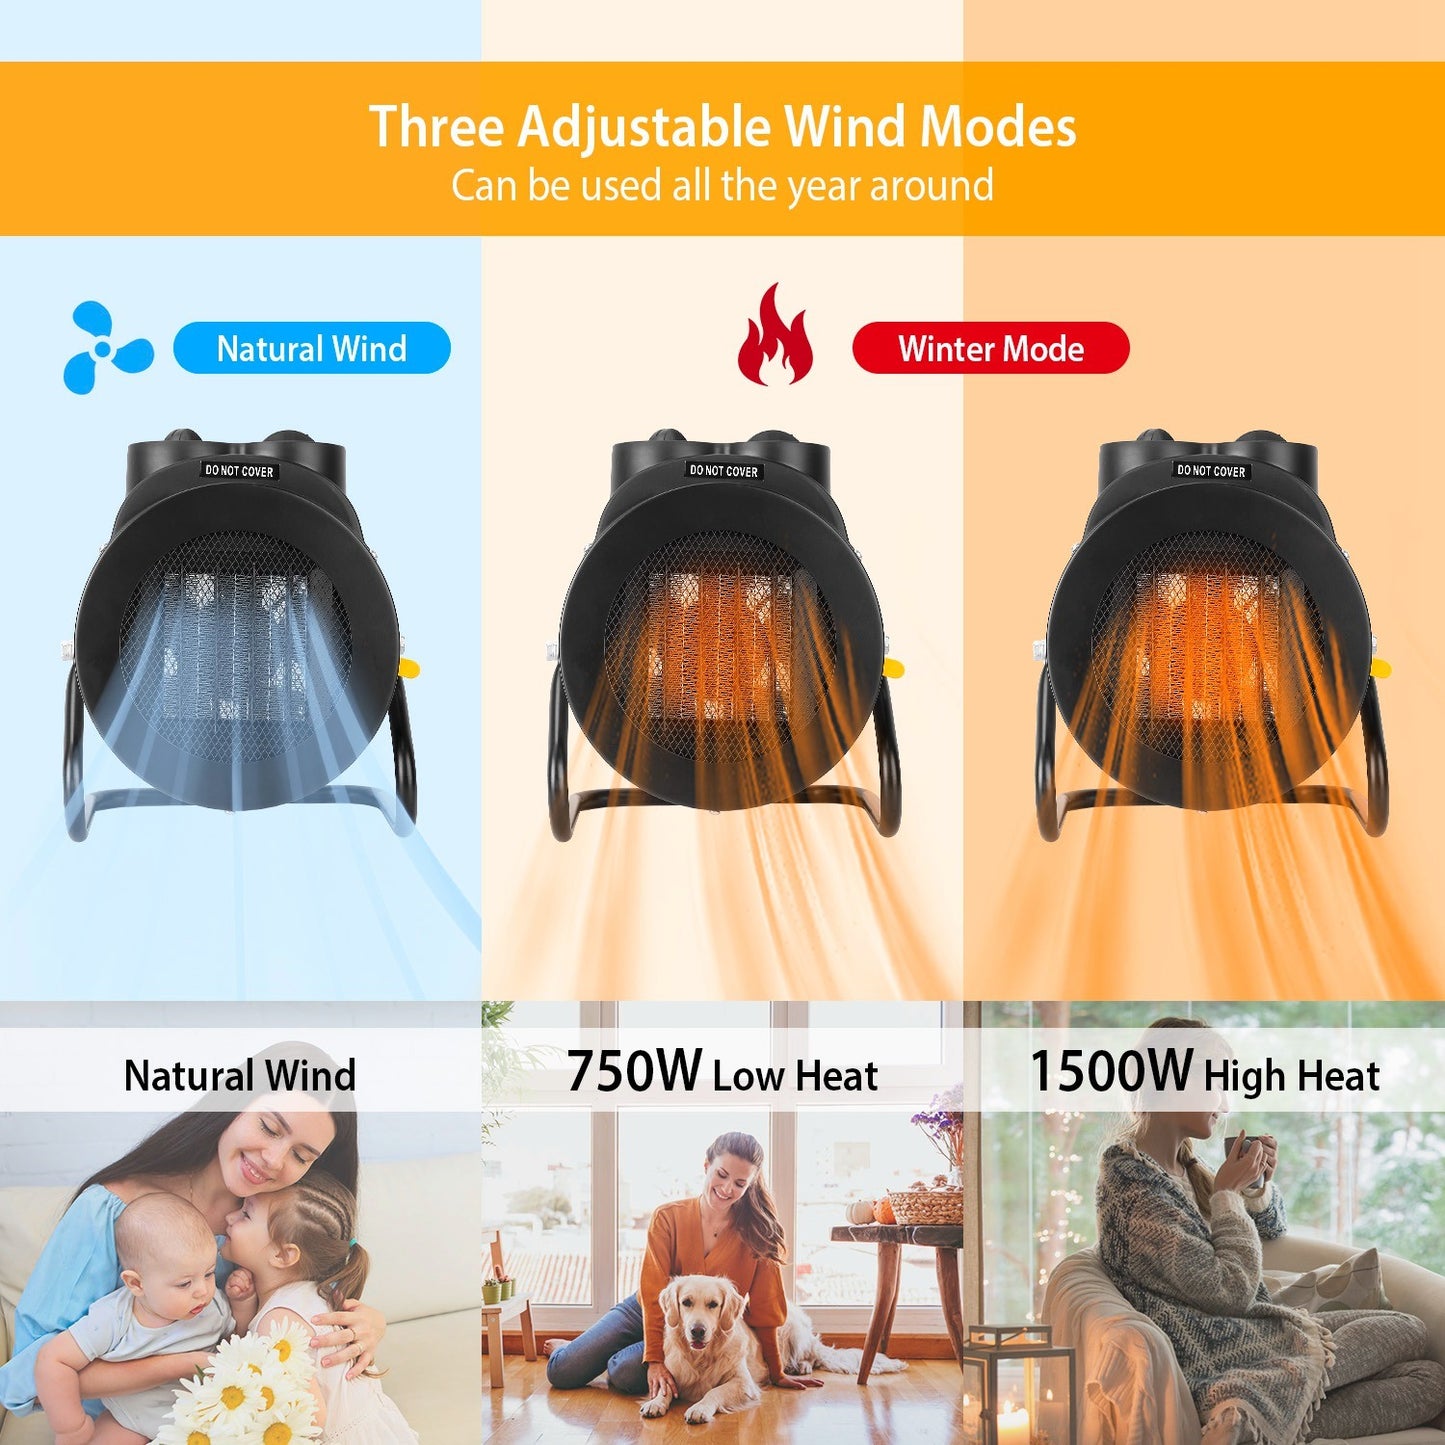 1500W Portable Electric Space Heater Personal Fan w/ Overheat Protection